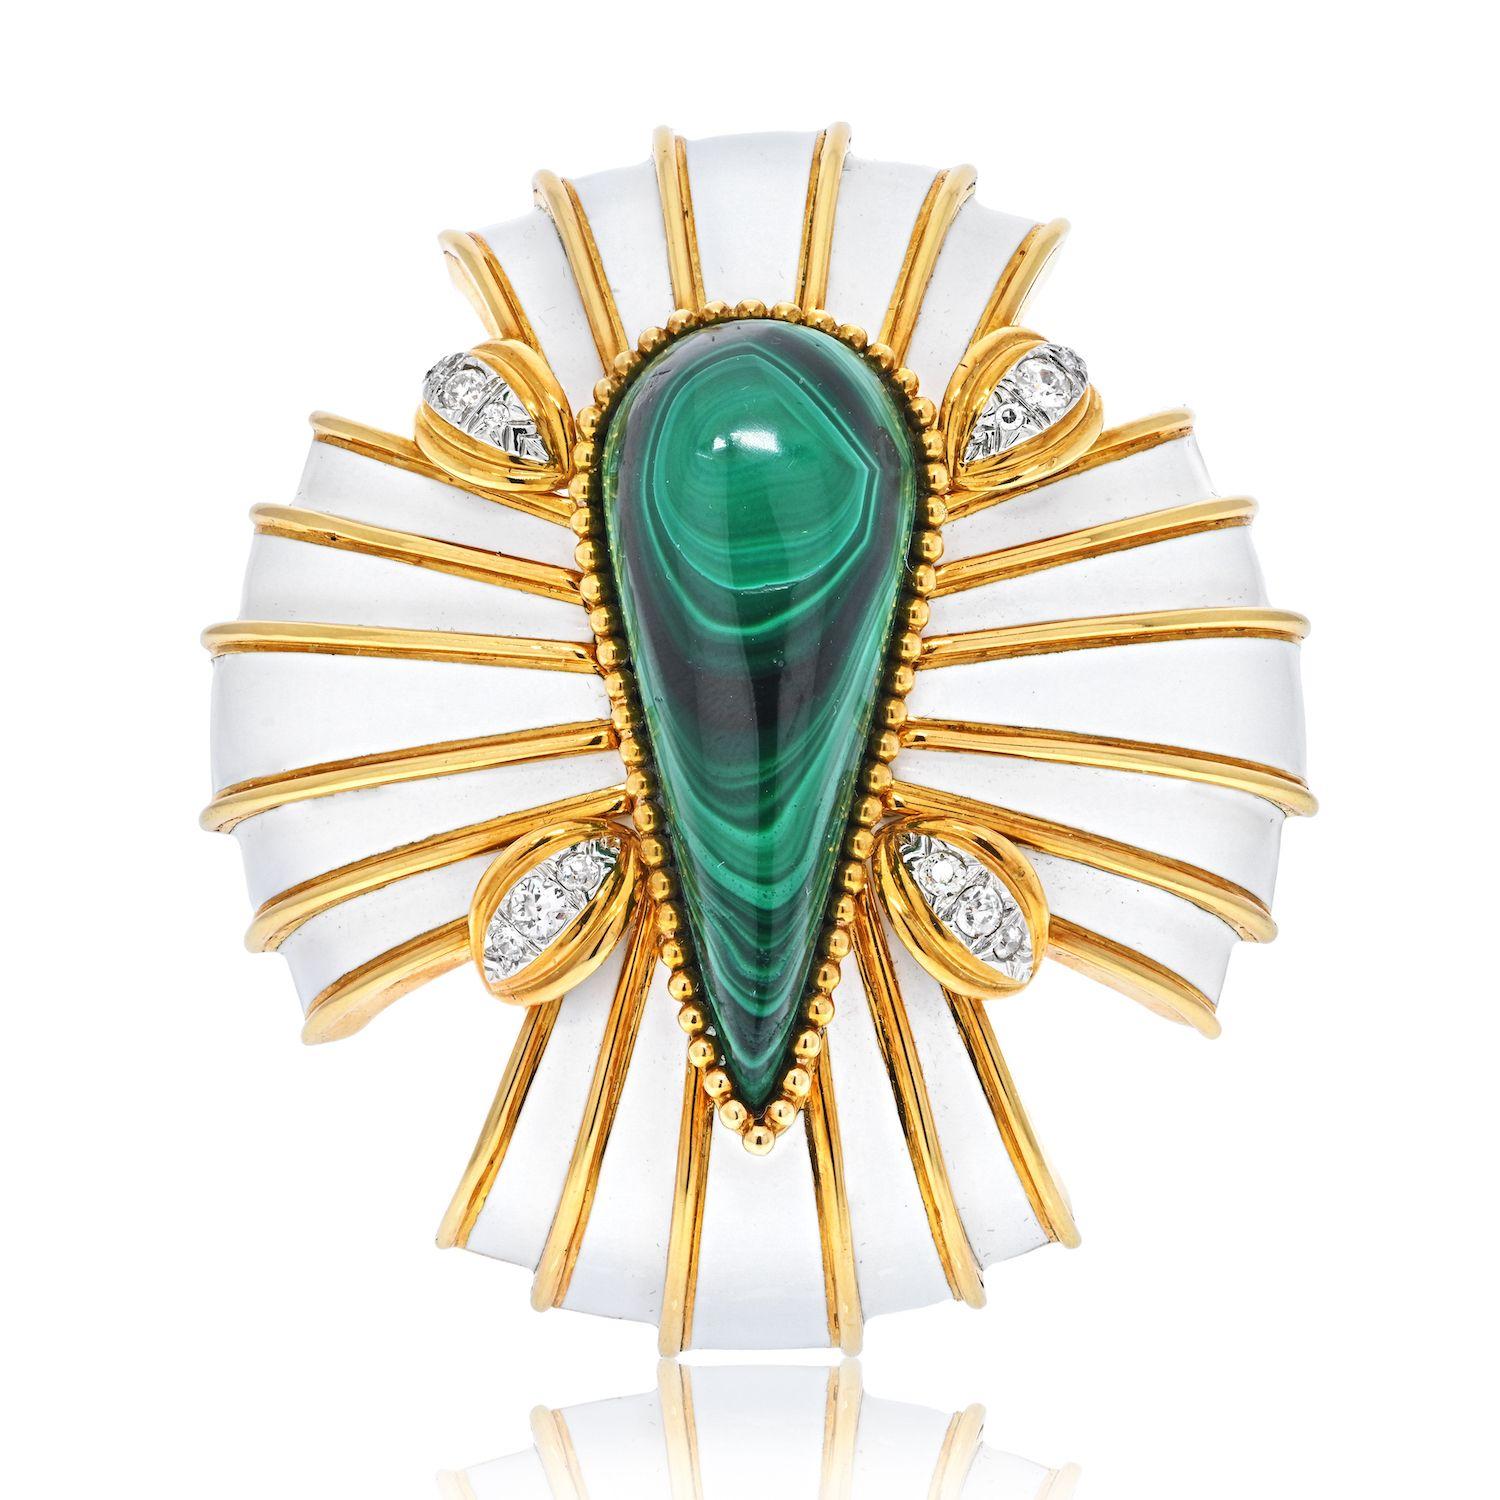 Stunning bold and colorful brooch/pendant created by David Webb in the 1980's. It is designed as a stylized Maltese cross and features a prominent tear-drop shape malachite in the center. The pin is made of yellow gold inlaid with white enamel and